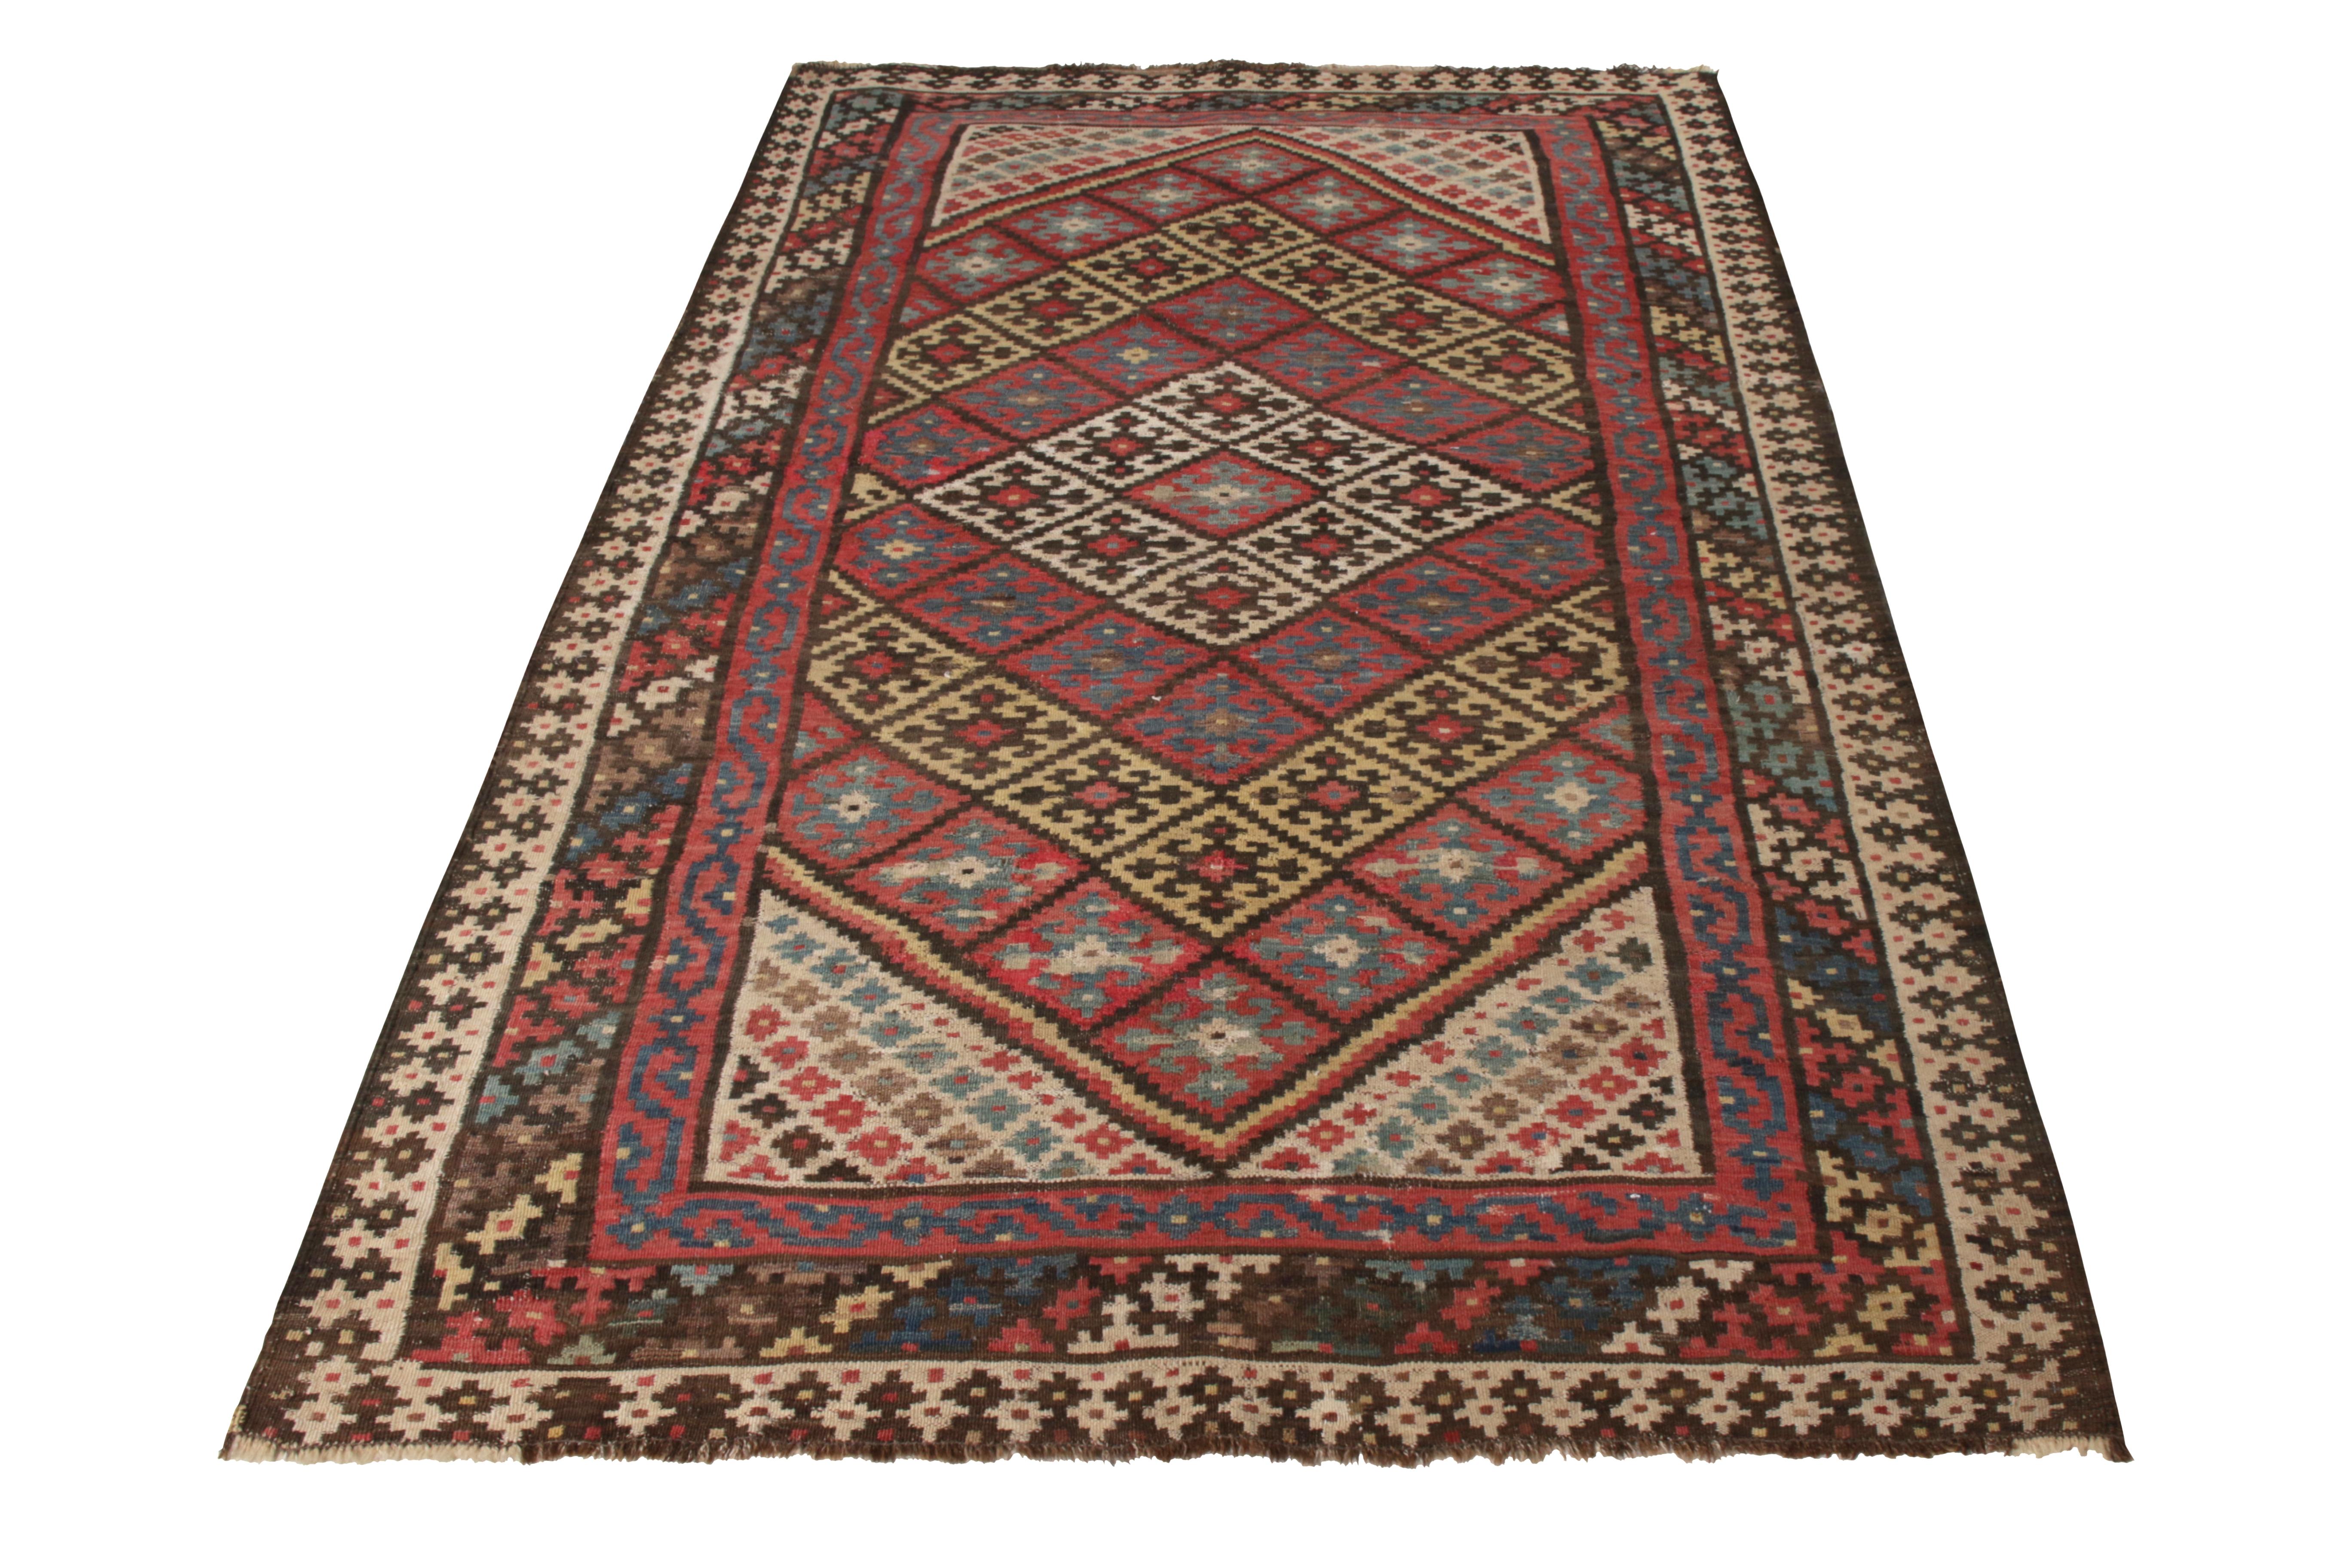 A vintage 5 x 9 Persian Kilim rug of Qashqai design lineage, handwoven in wool originating circa 1950-1960. Enjoying red and beige-brown hues with multicolor accents lending the geometric pattern a playful movement. Inviting yet meticulous among